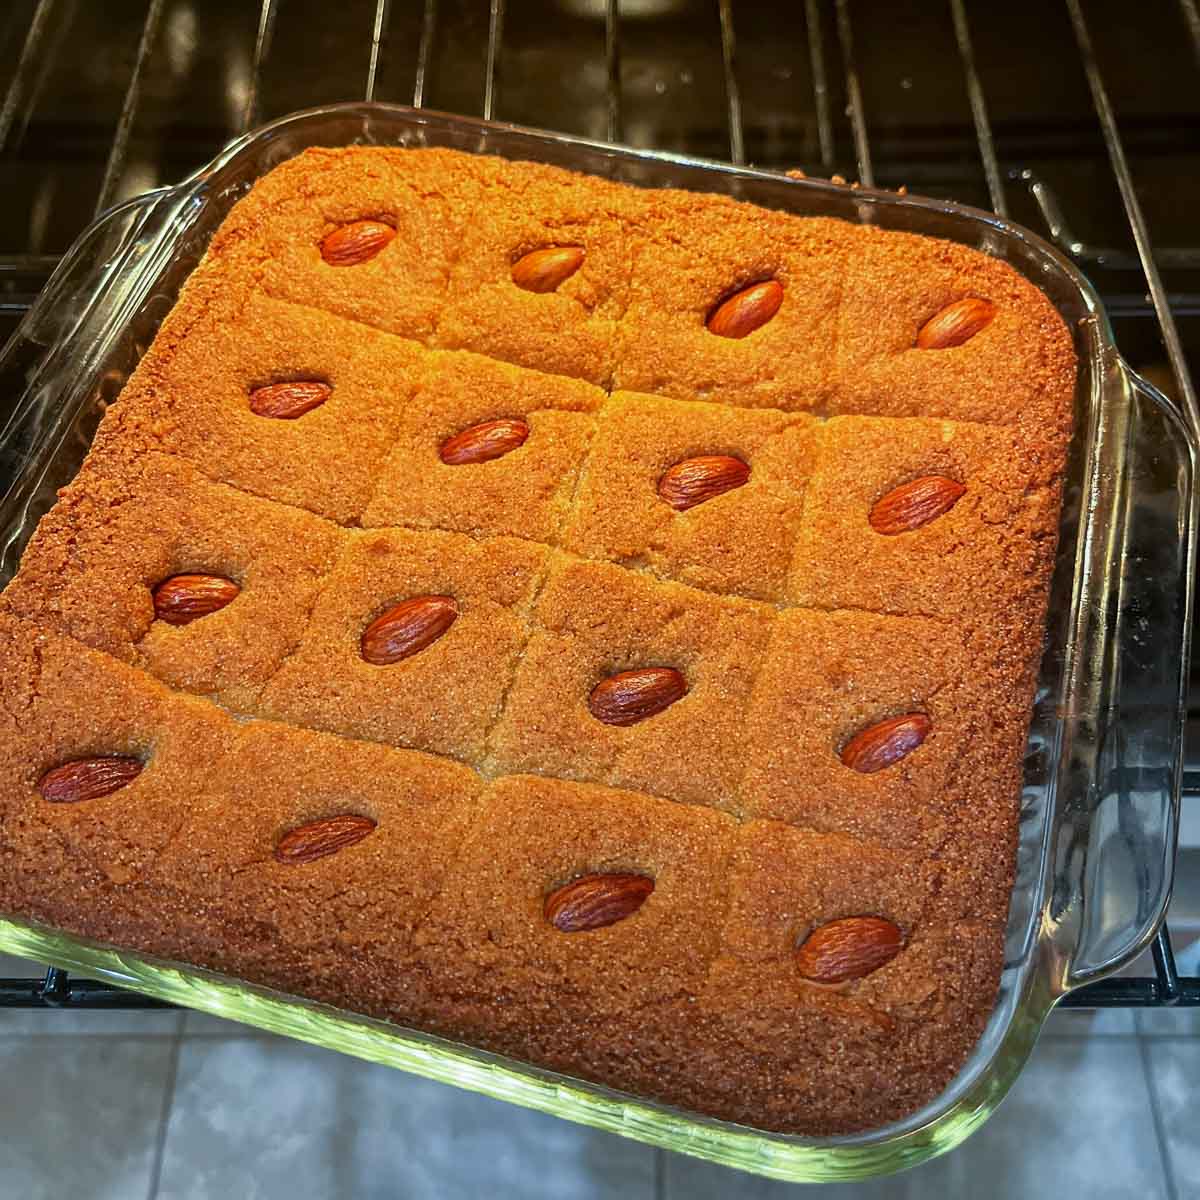 namoura cake coming out of the oven